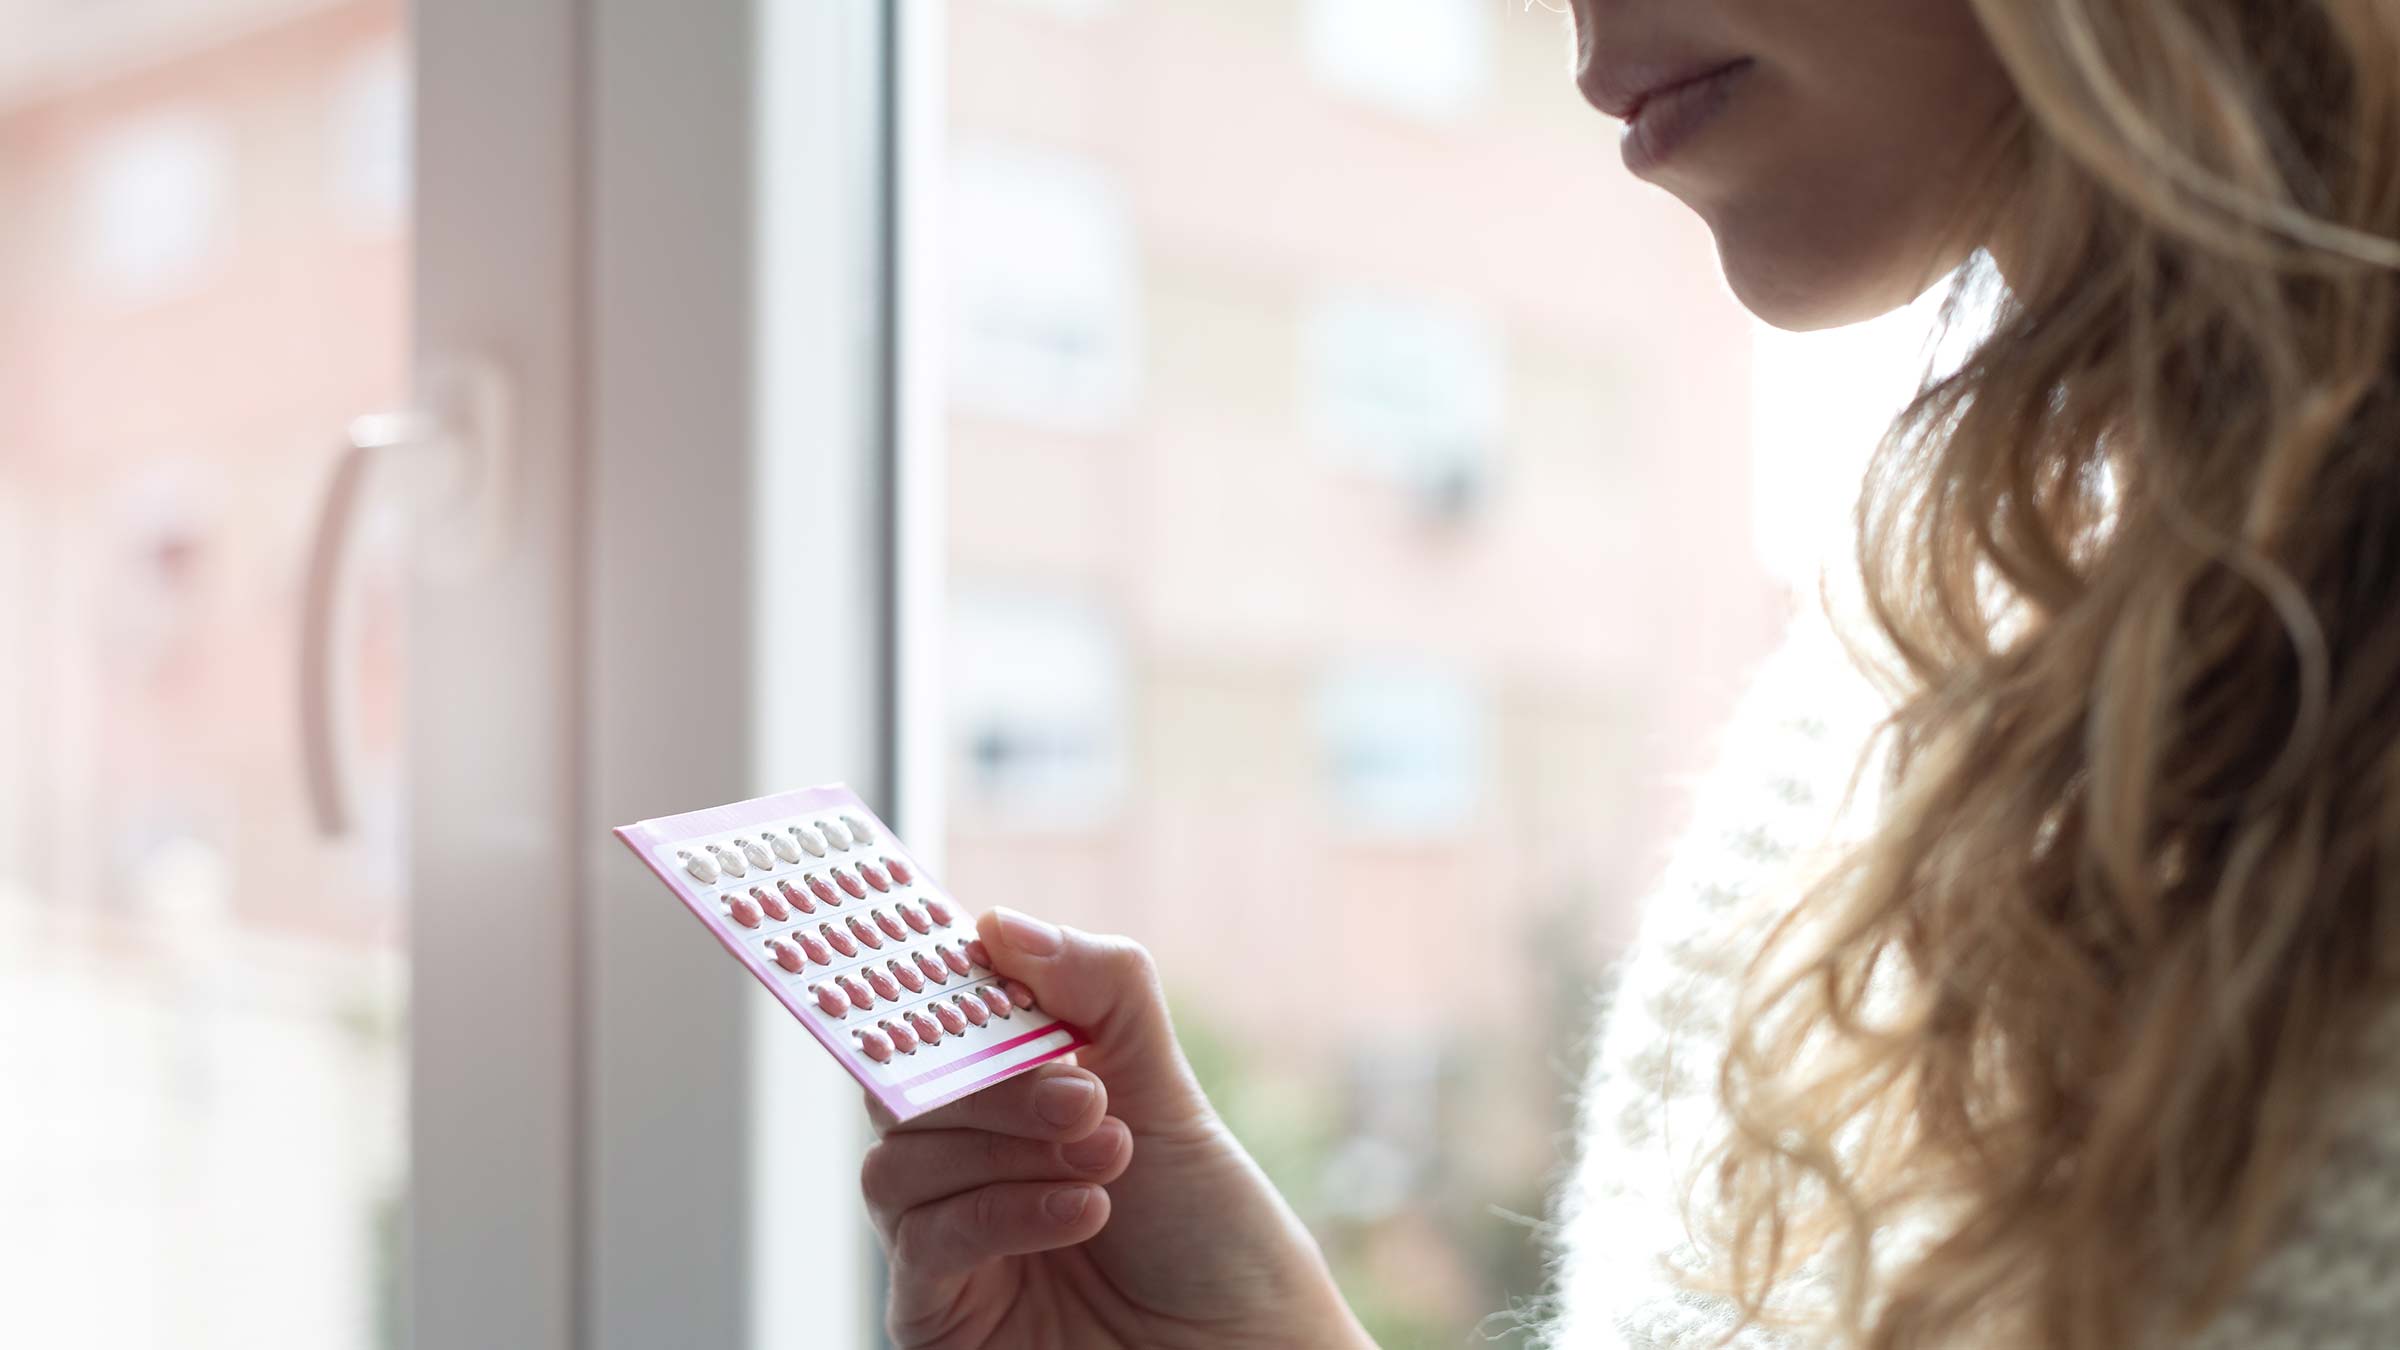 A young woman holding a package of birth control pills